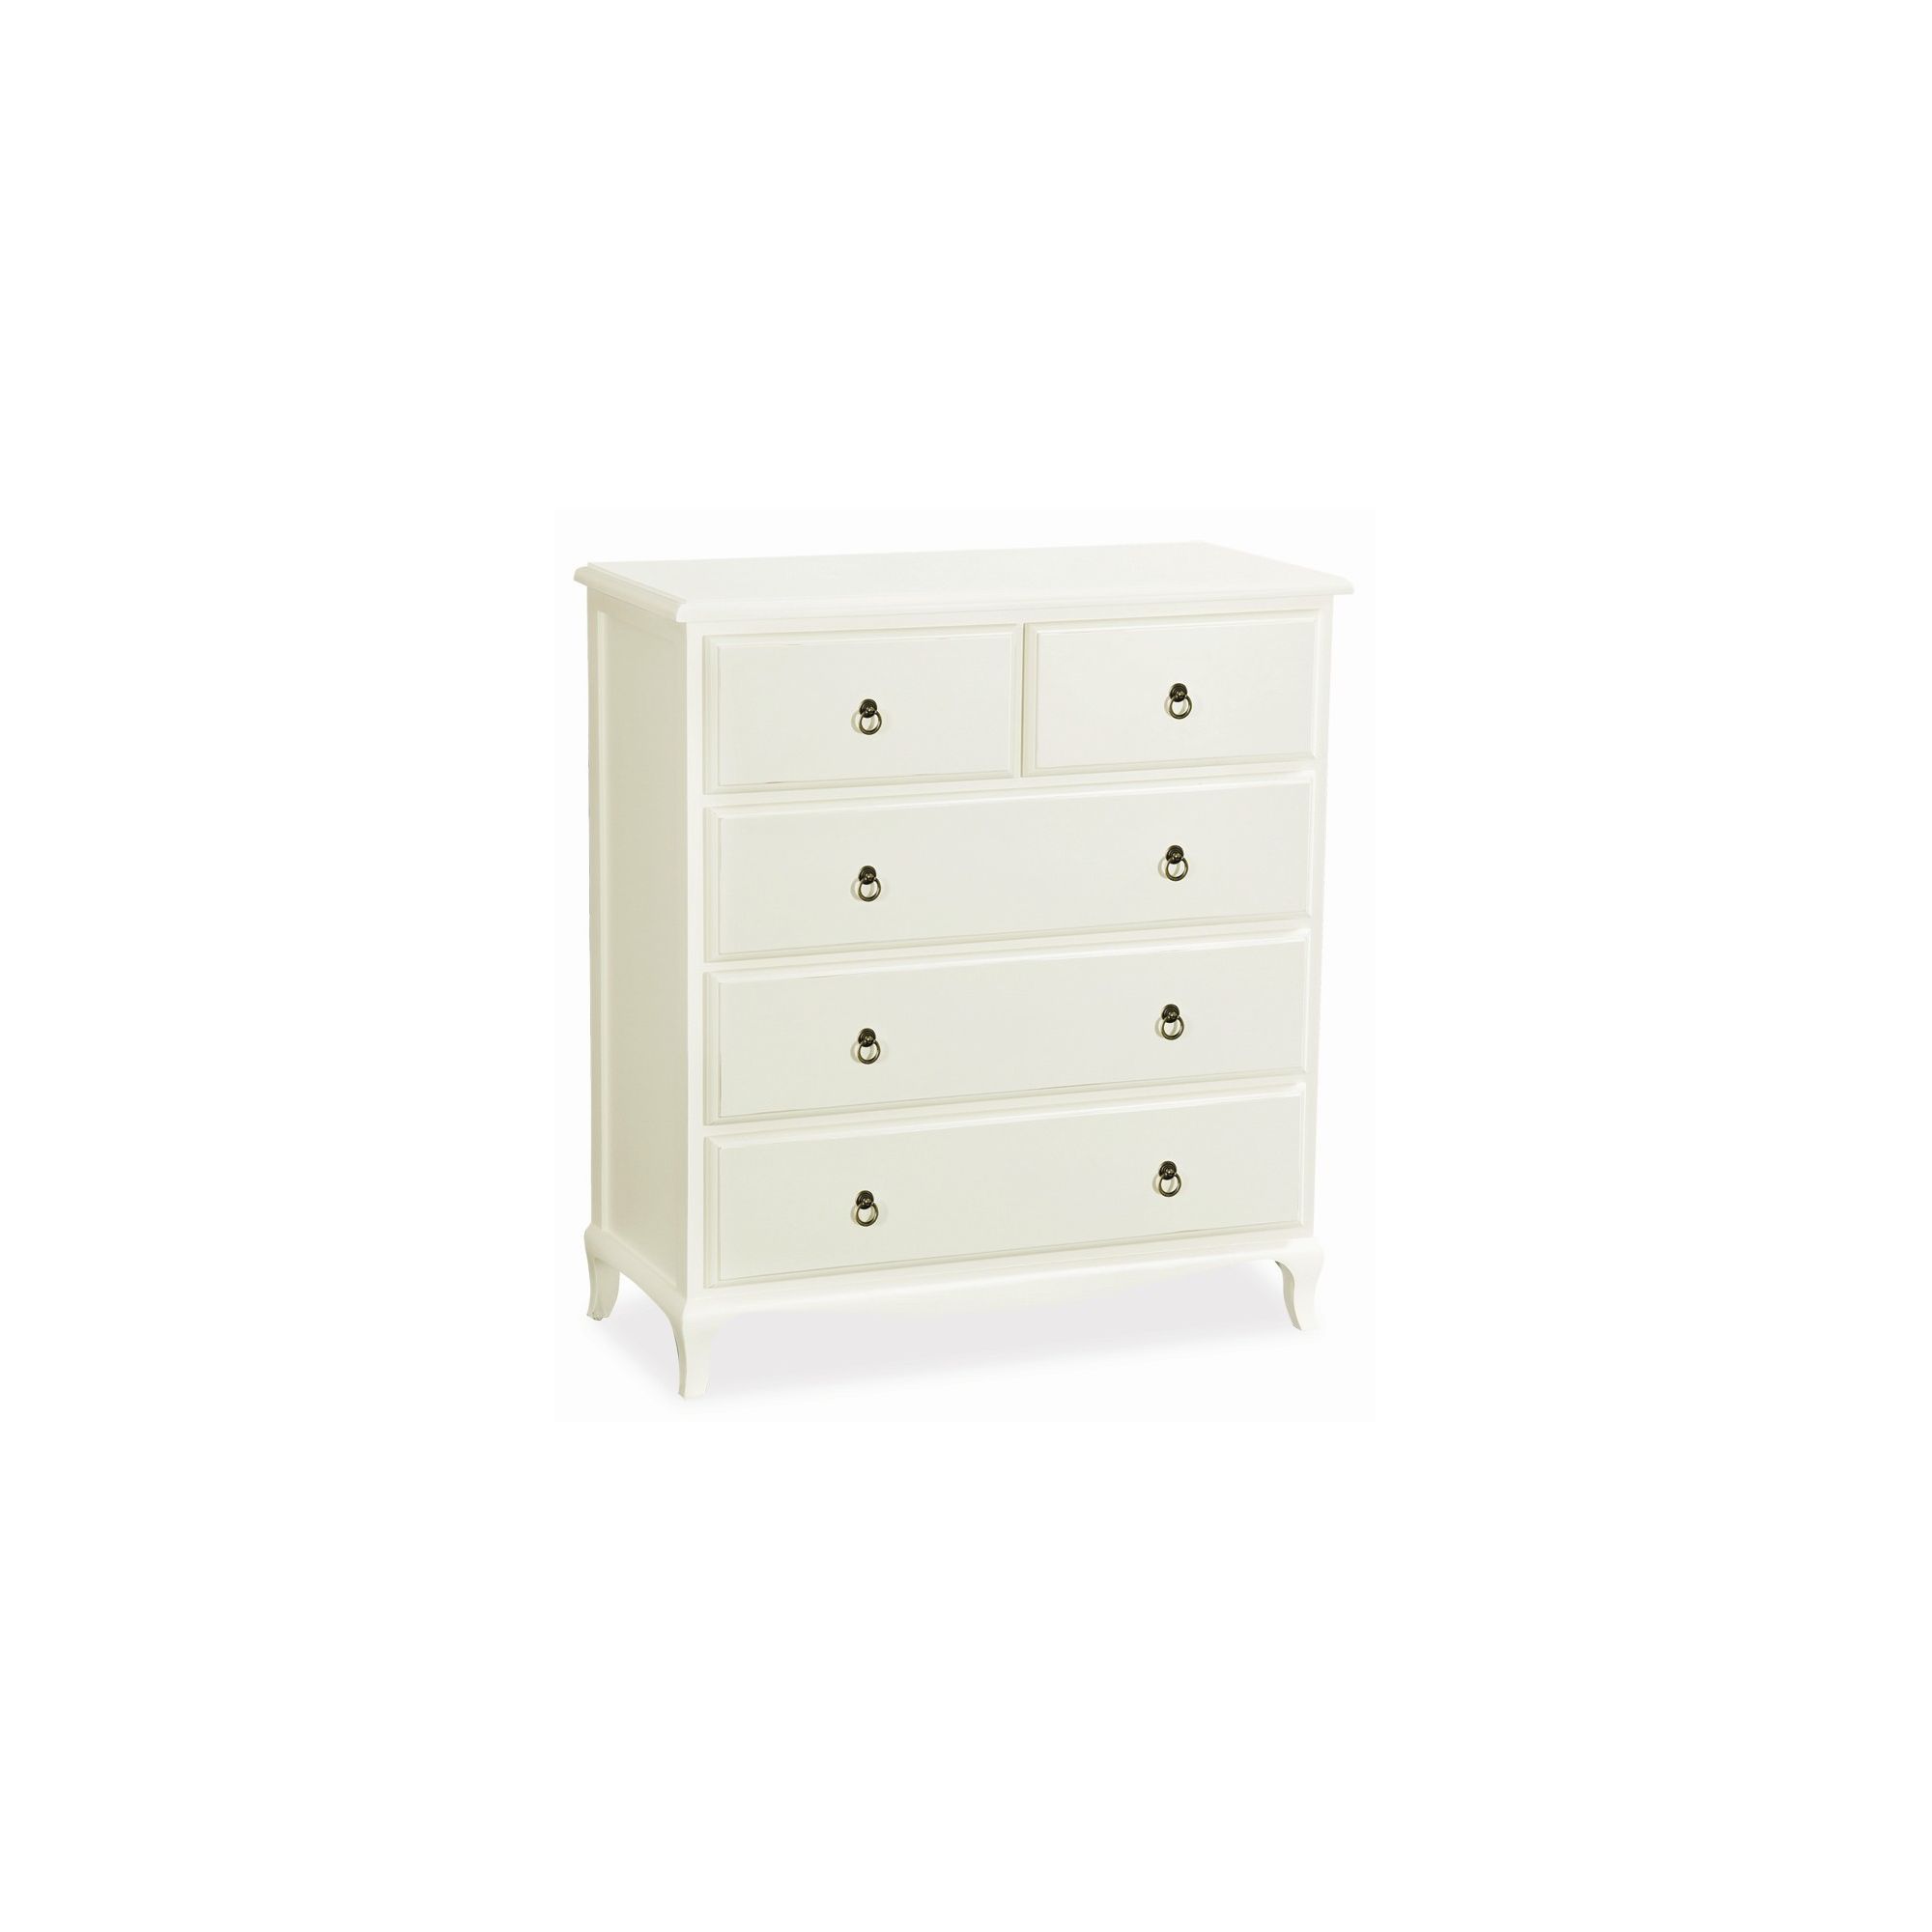 Alterton Furniture Normandy 3 Drawer Chest at Tesco Direct